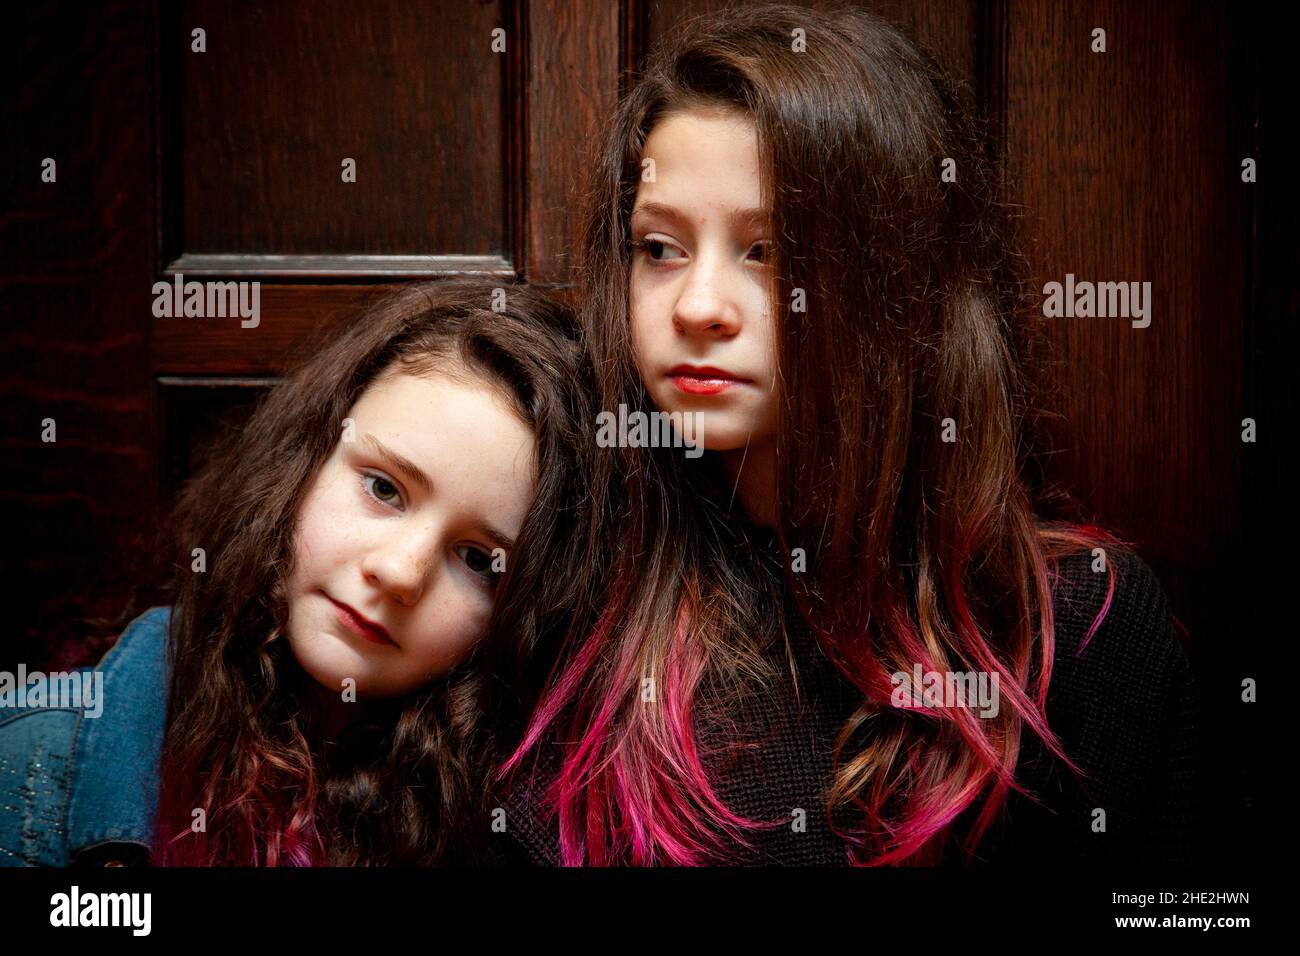 two young girls or siblings pose in a serious expression while leaning on each other Stock Photo